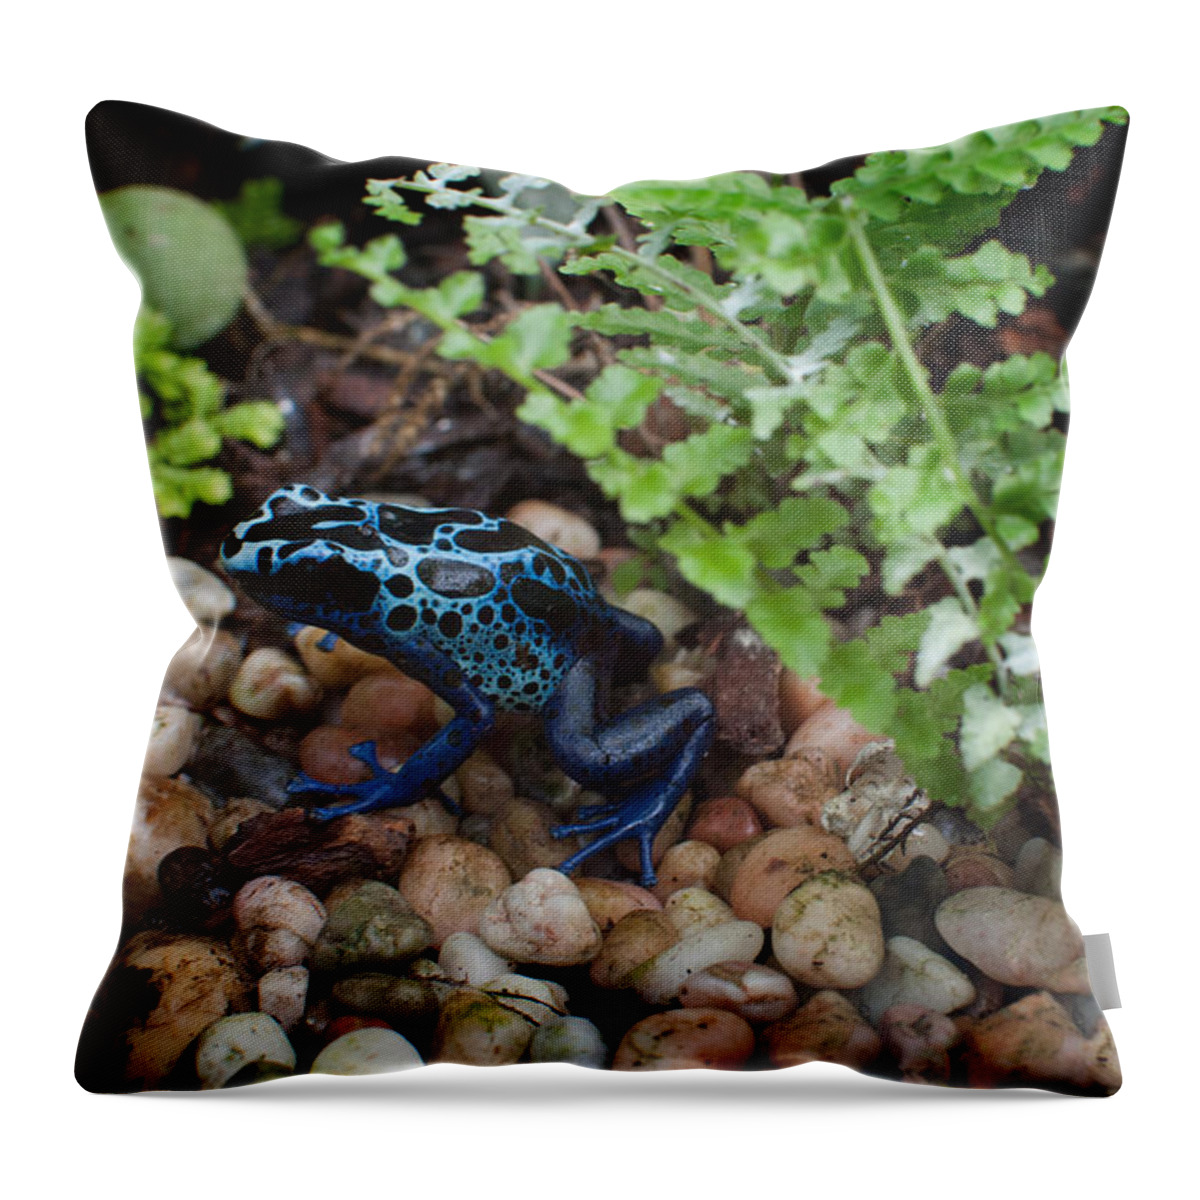 Animals Throw Pillow featuring the digital art Poison Dart Frog by Carol Ailles